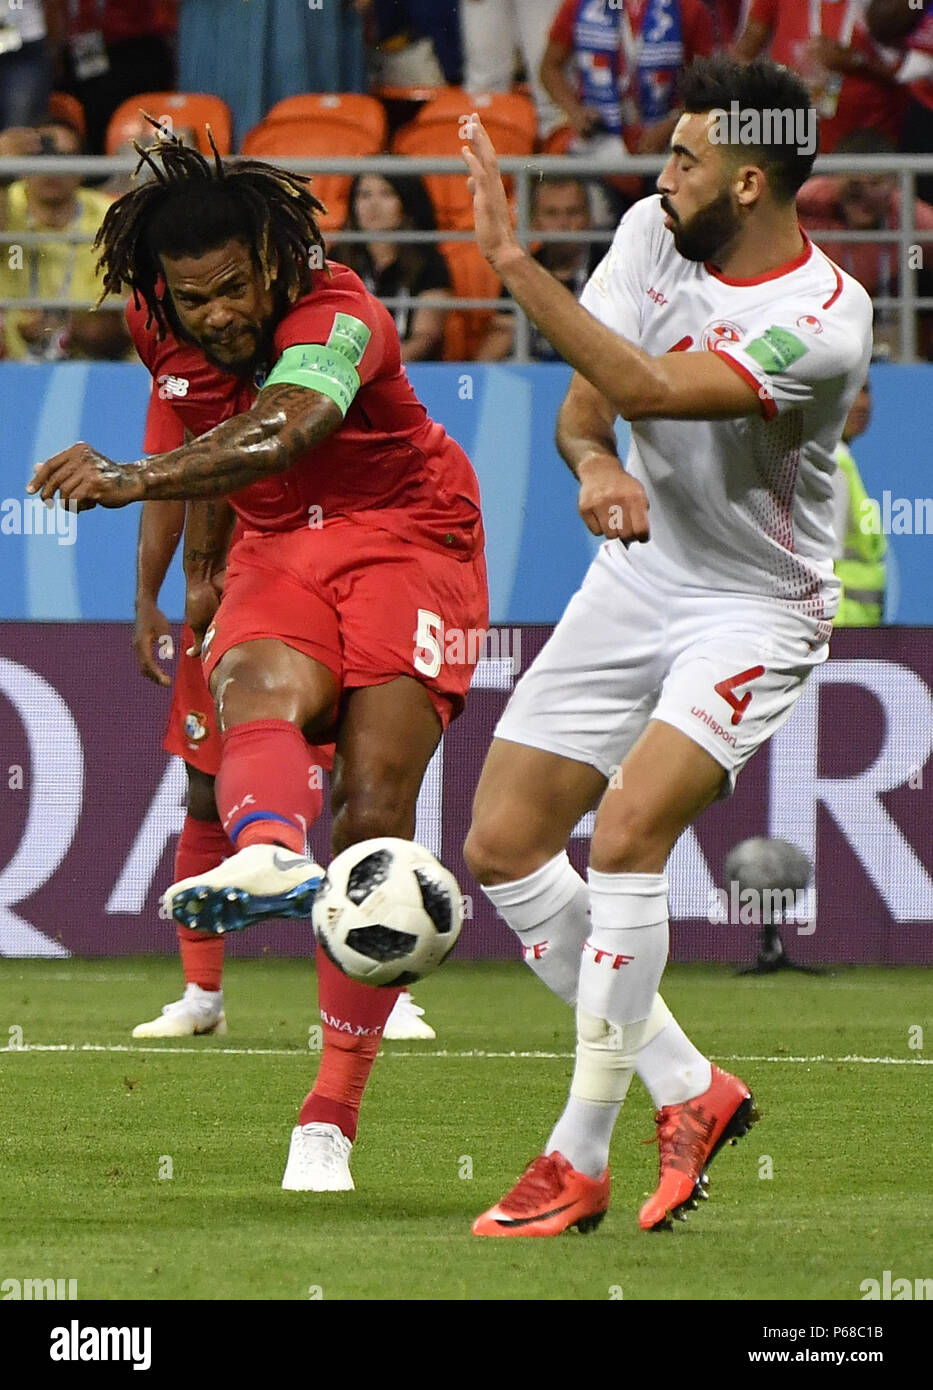 Saransk, Russia. 28th June, 2018. Roman Torres (L) of Panama vies with Yassine Meriah of Tunisia during the 2018 FIFA World Cup Group G match between Panama and Tunisia in Saransk, Russia, June 28, 2018. Credit: He Canling/Xinhua/Alamy Live News Stock Photo